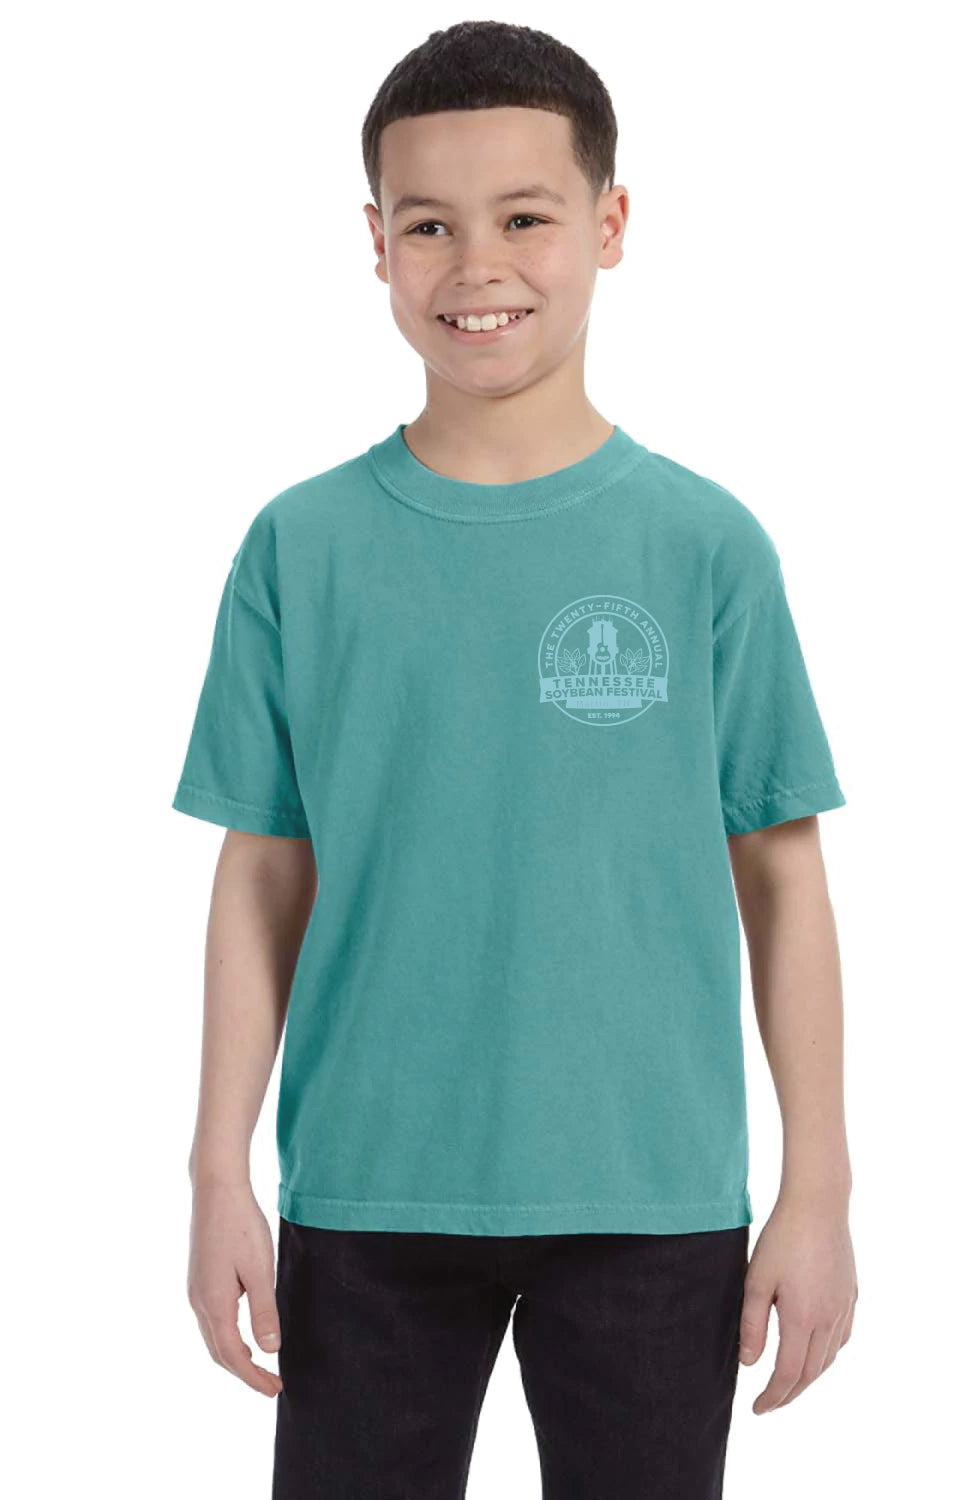 25th Annual Soybean Festival Commemorative Youth Shirt